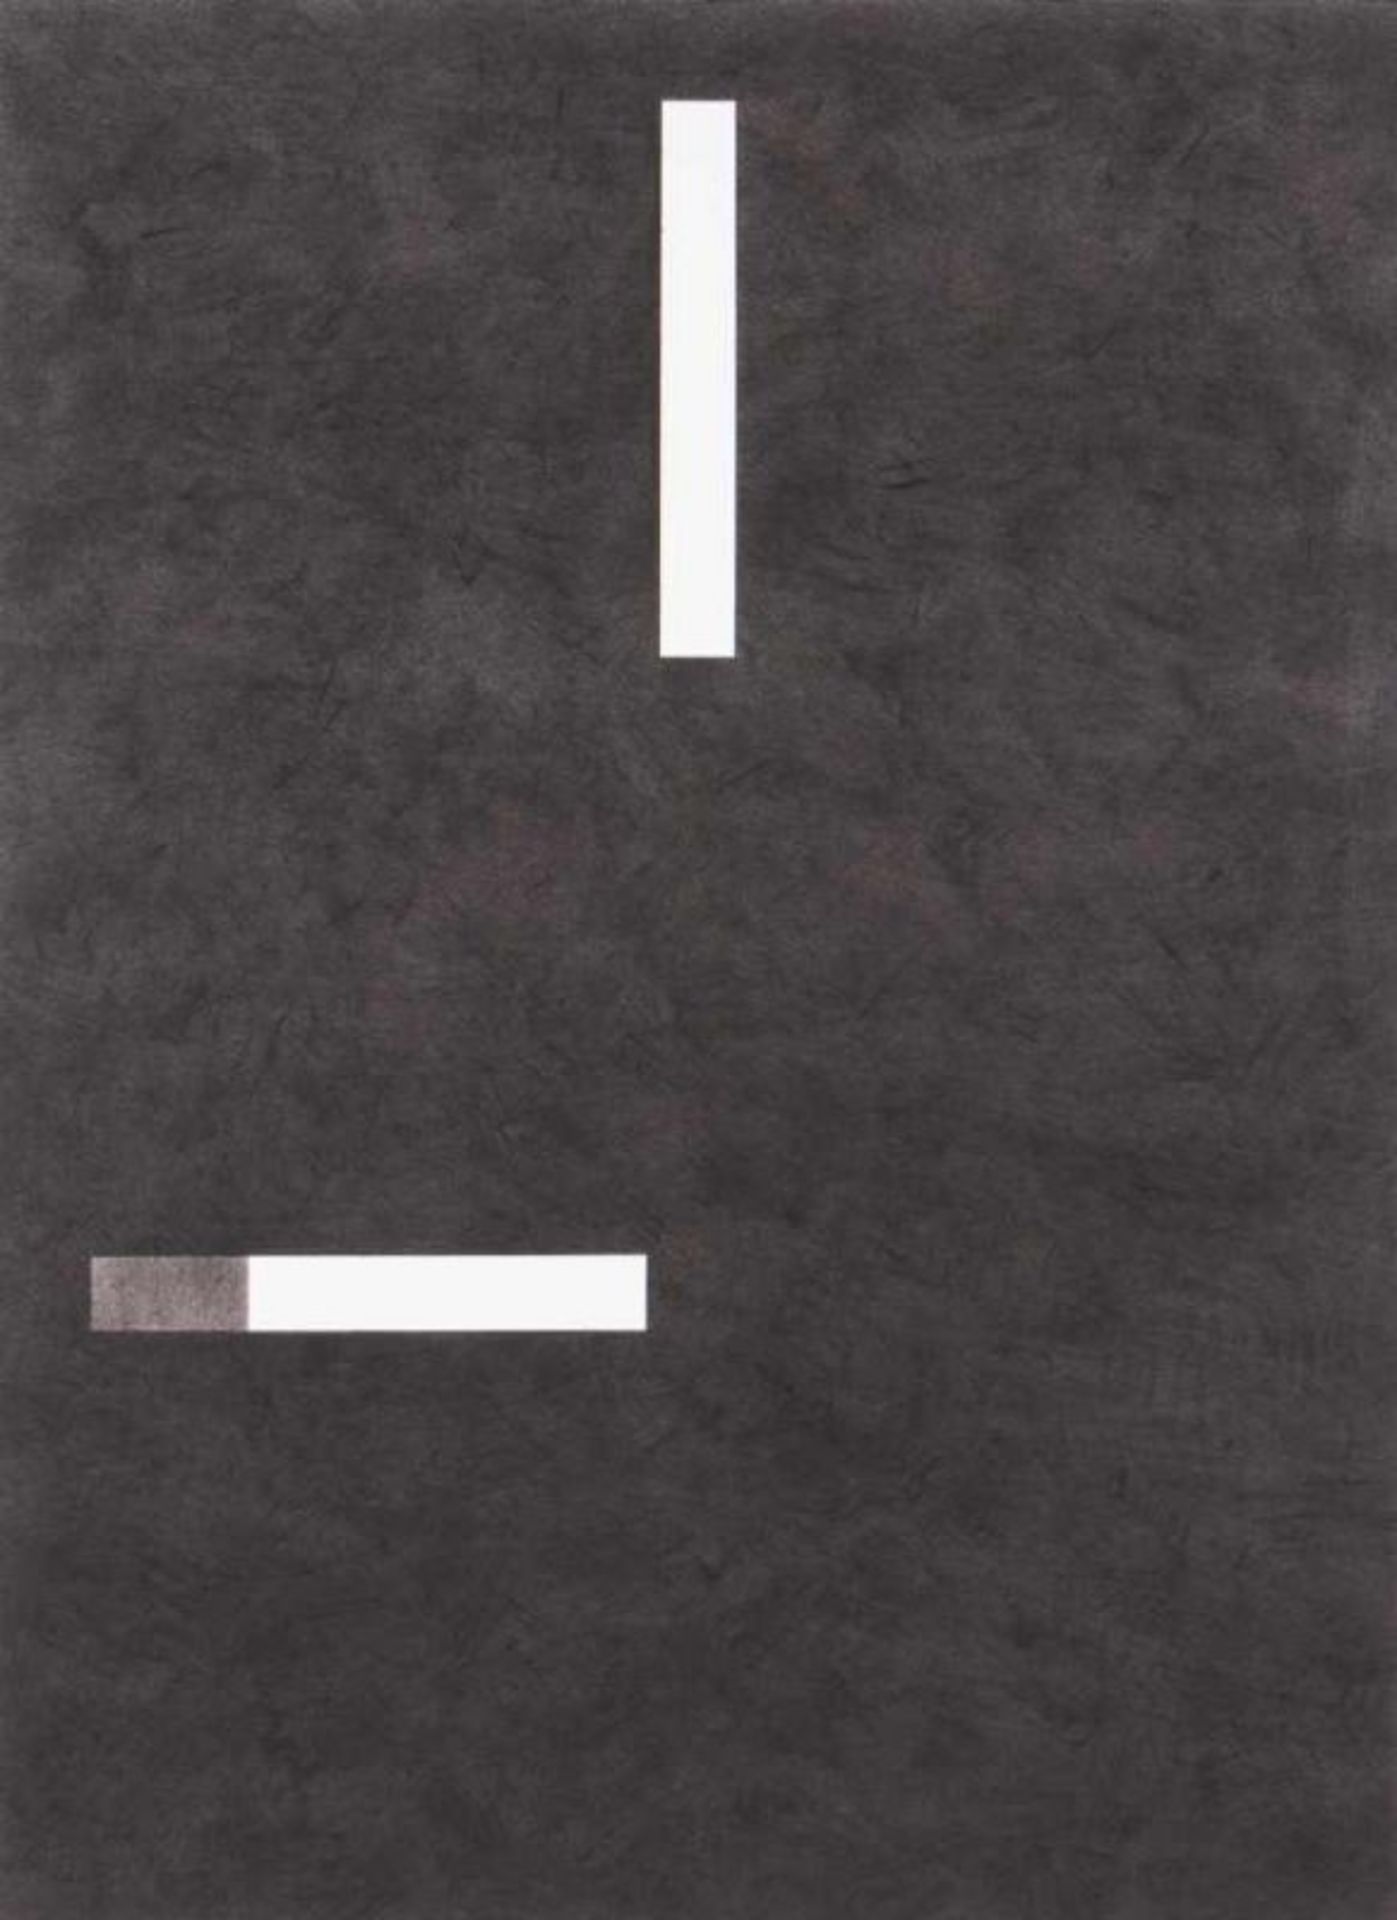 Fernando Calhau (1948-2002) Untitled Graphite on paper Signed and dated 91 100x70 cm